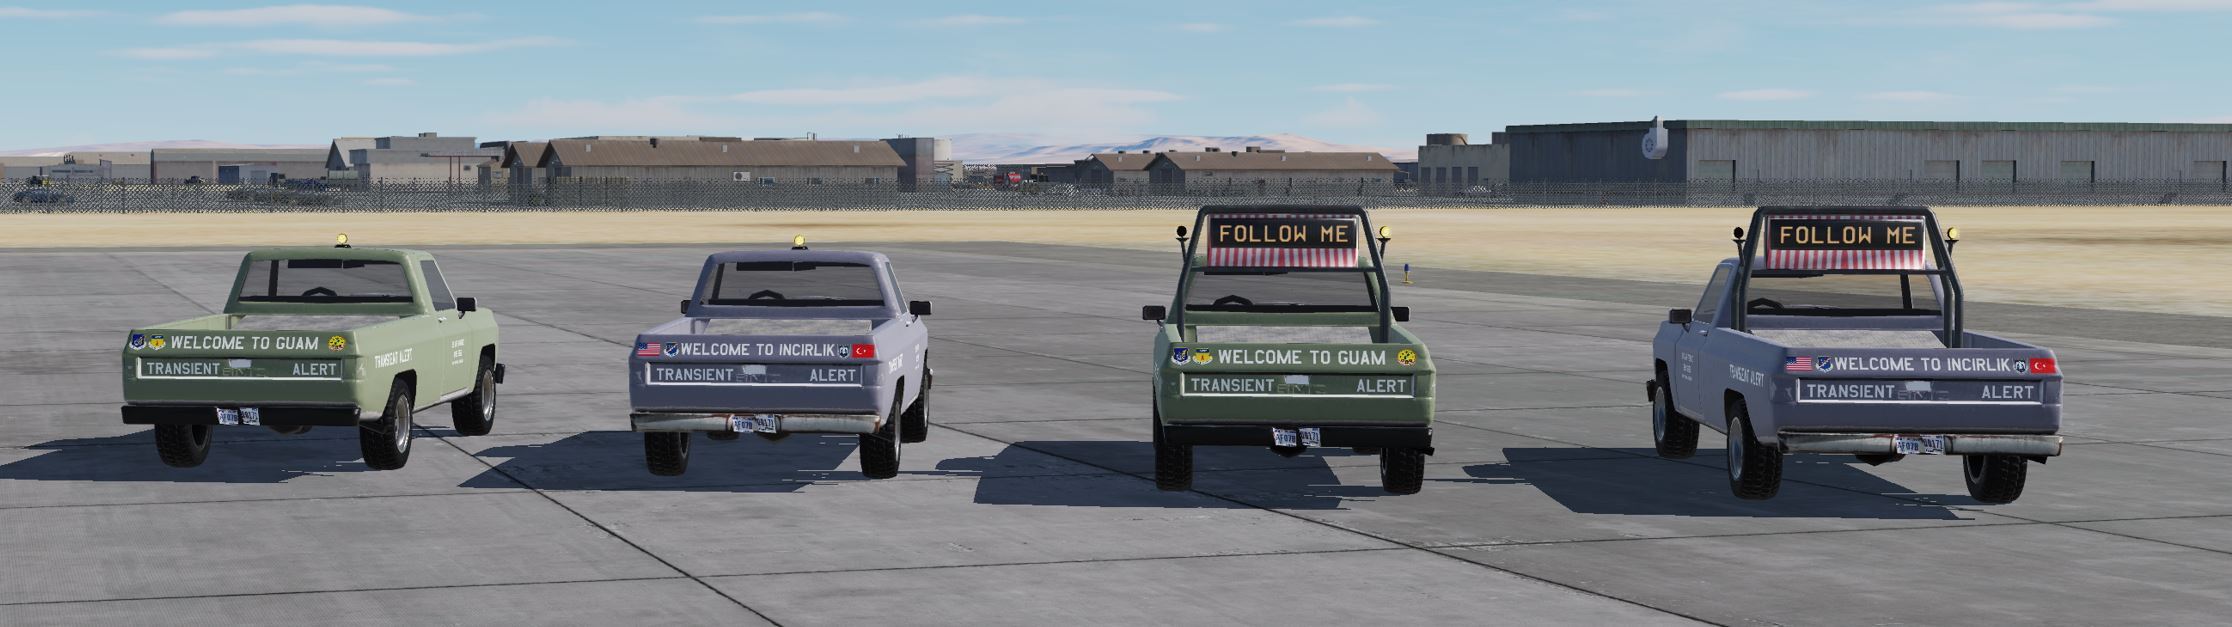 Airport Service Vehicles Skins for Guam and Incirlik